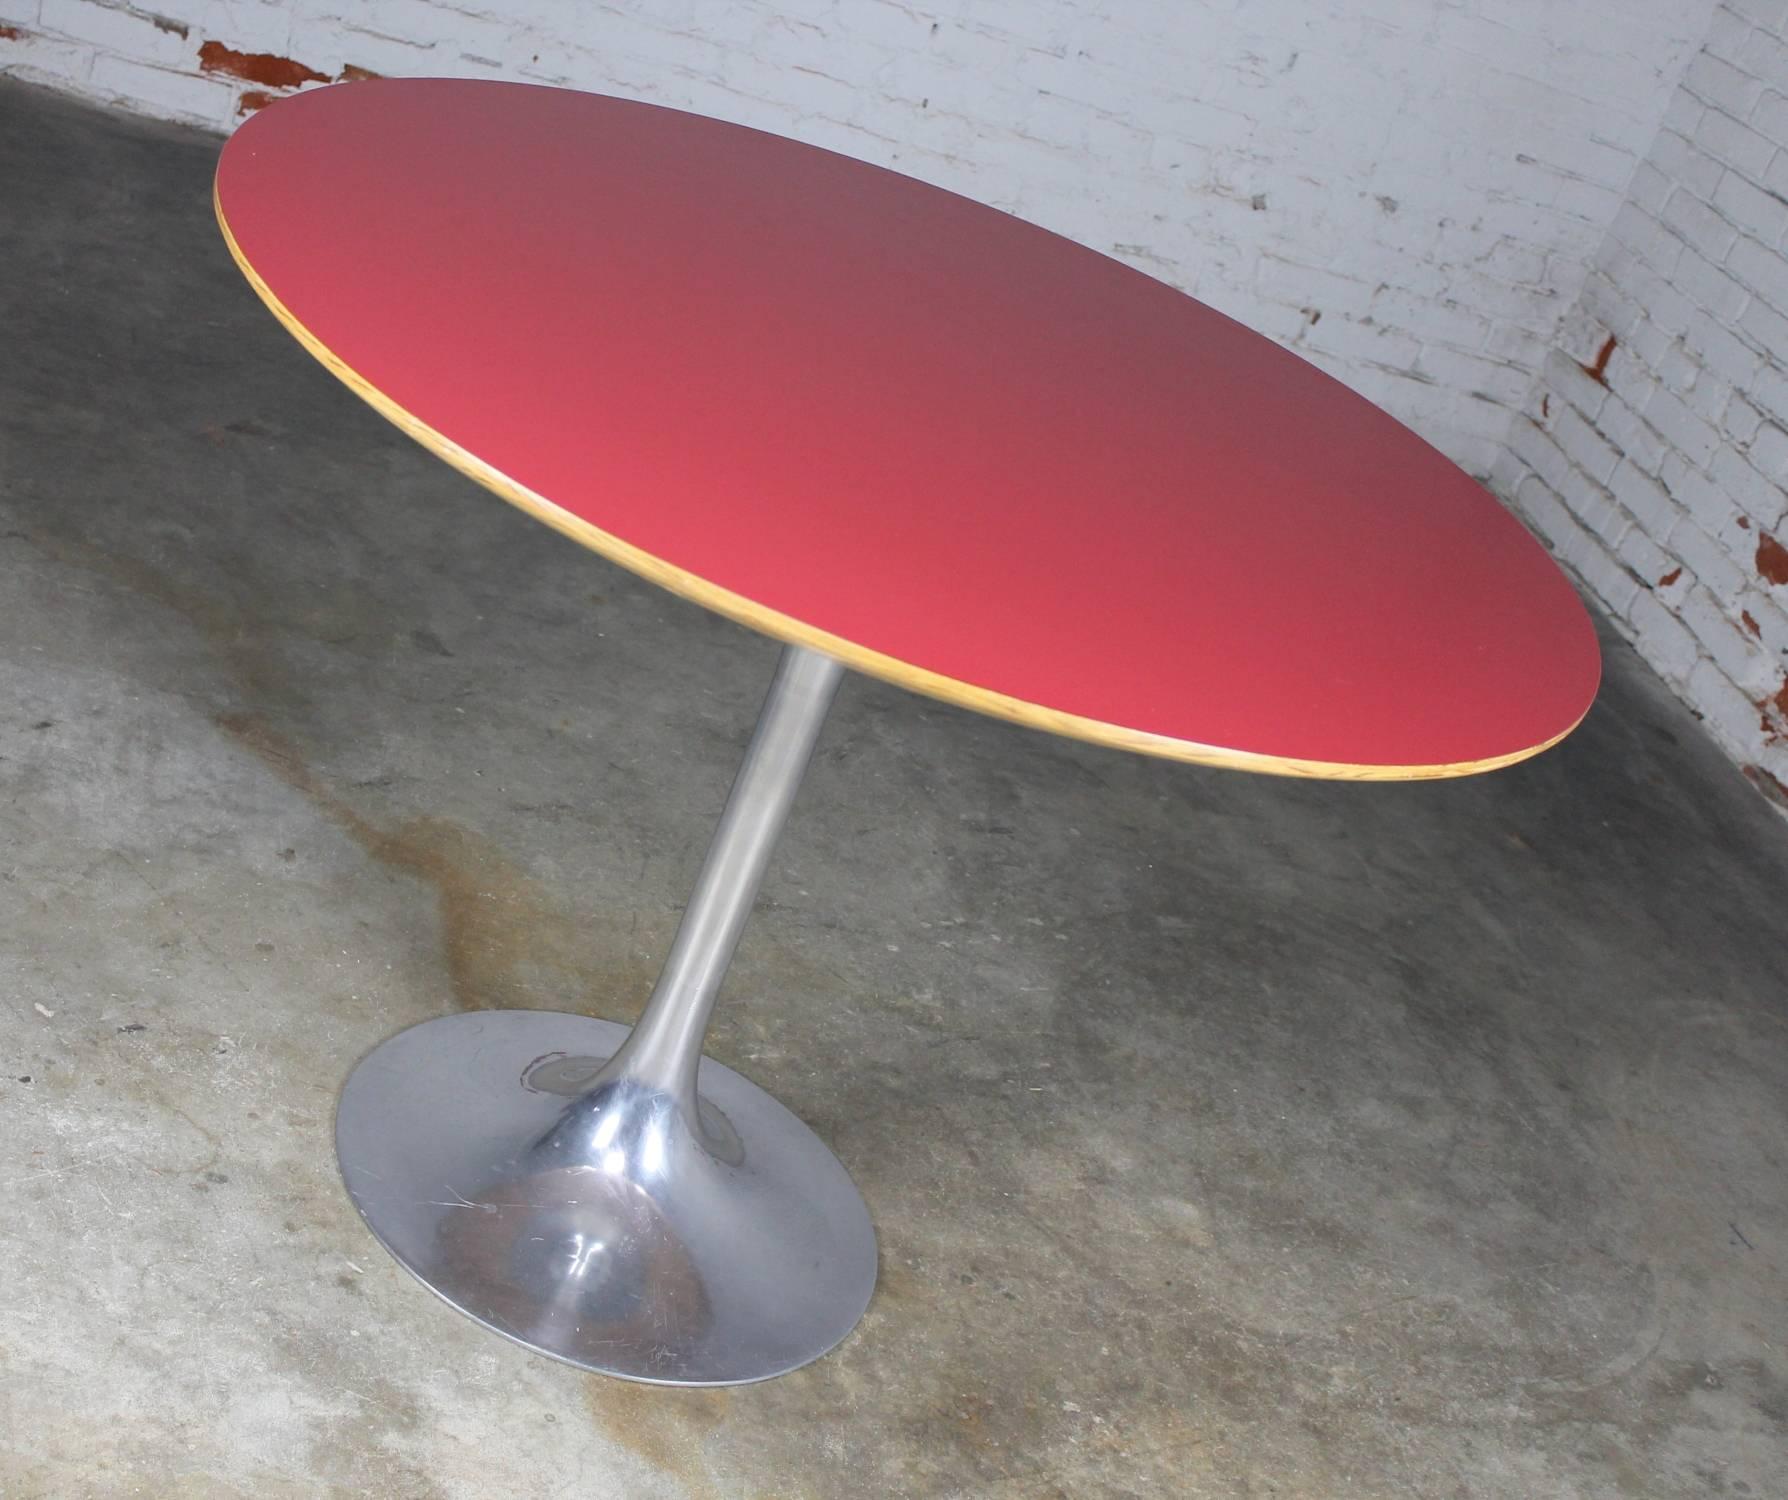 Awesome vintage Saarinen-style tulip base dining table. The base is polished alunimum and most likely Burke. The top is a relatively newly made top in a vintage style using red formica or laminate and plywood with a back-beveled edge. This table is